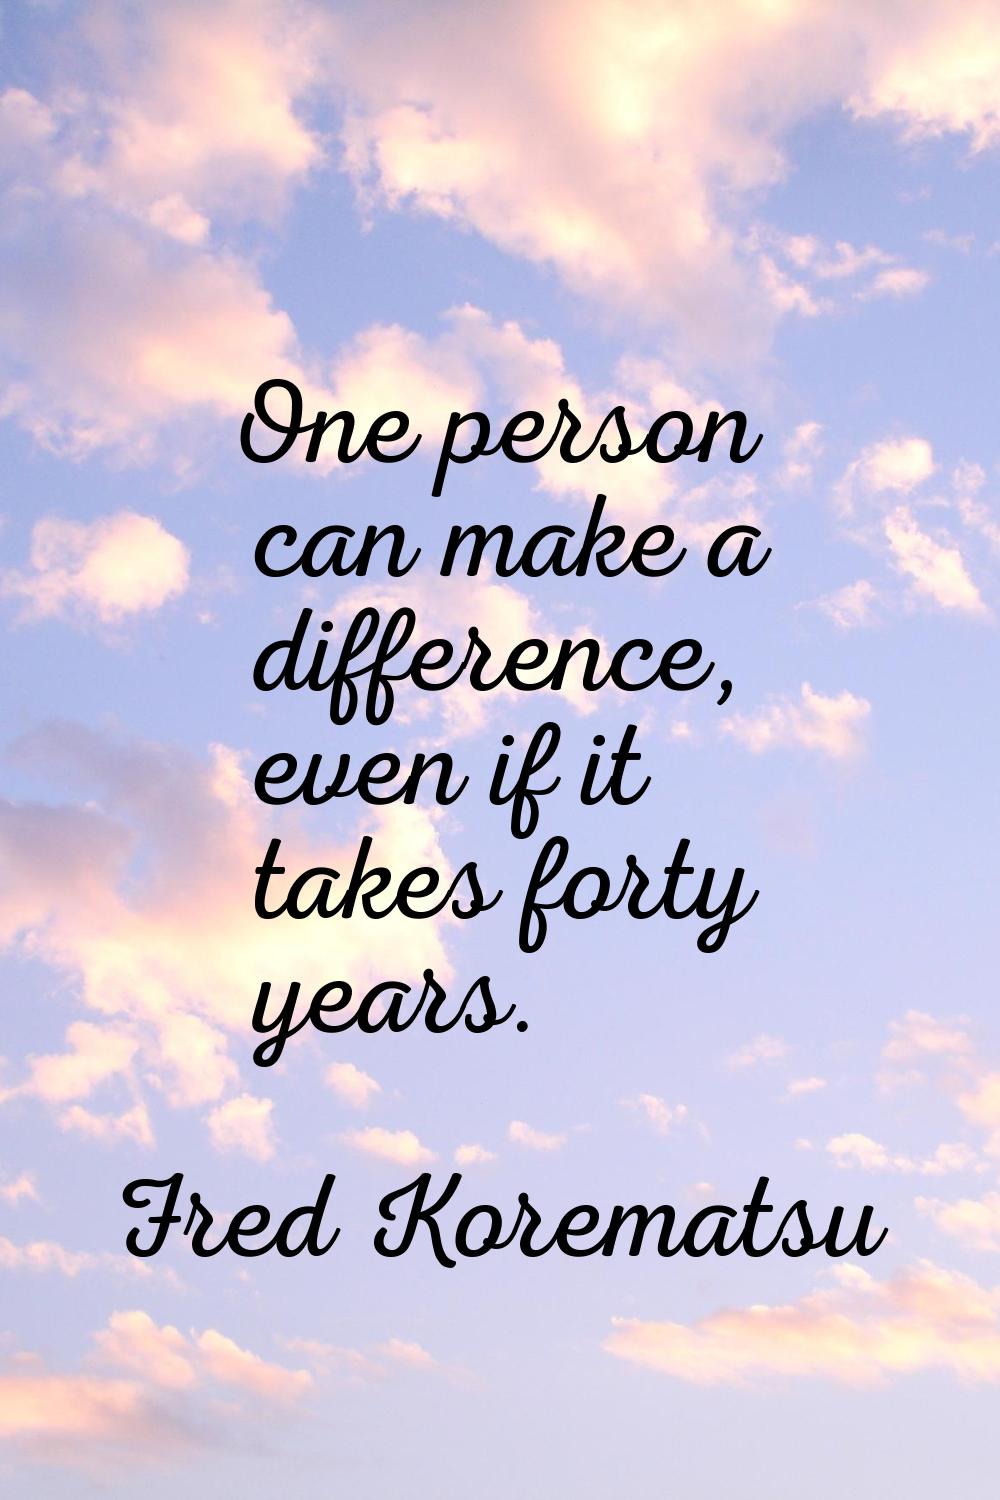 One person can make a difference, even if it takes forty years.